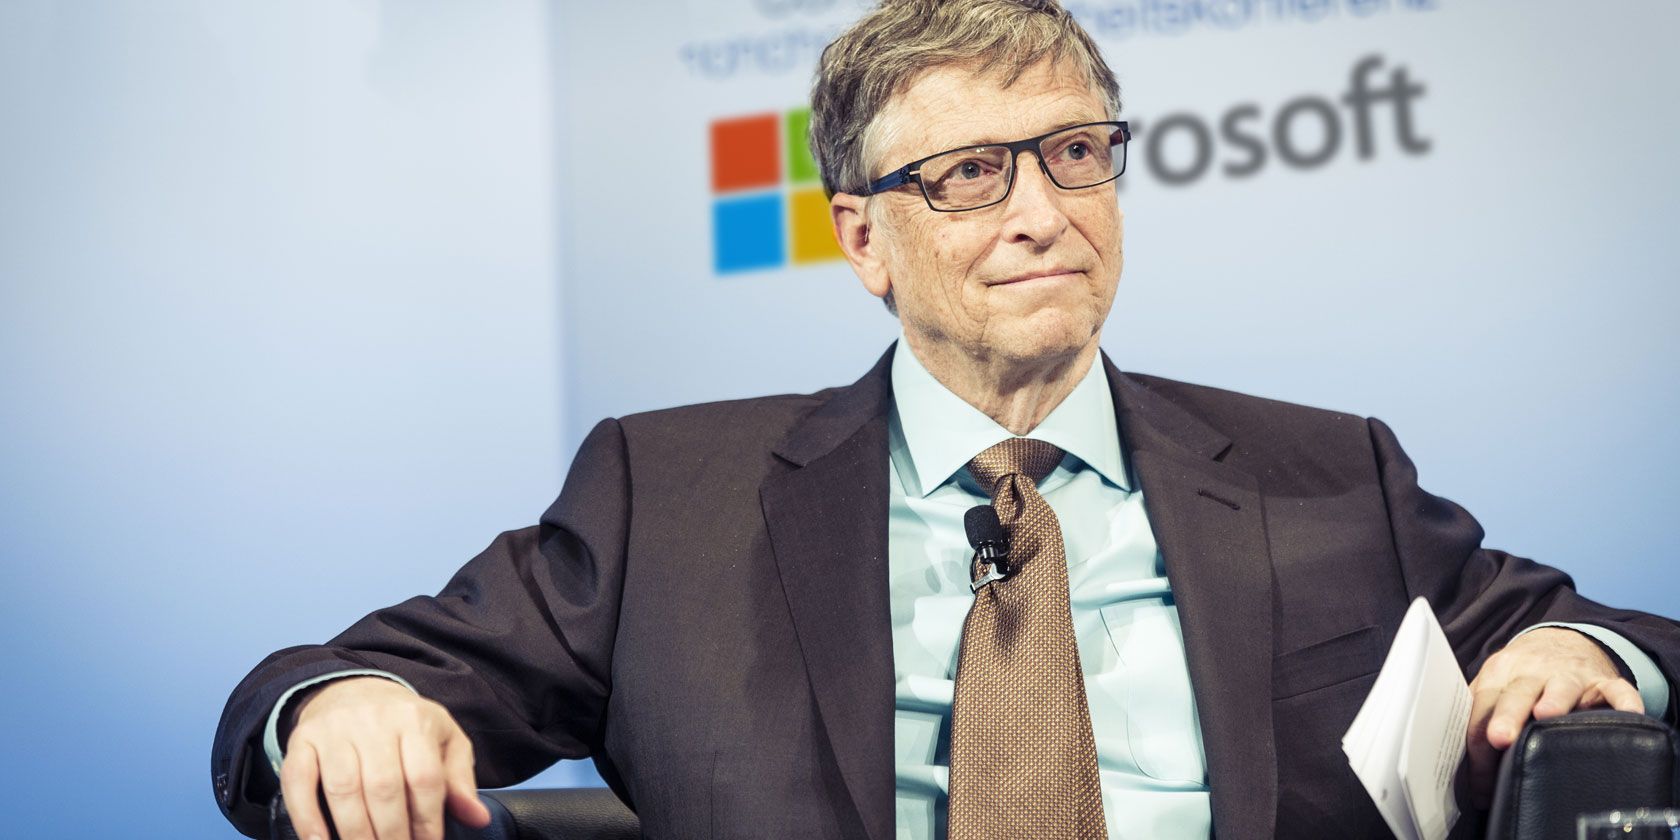 The History of Windows: The 15 Best (and Funniest) Stories by Bill Gates